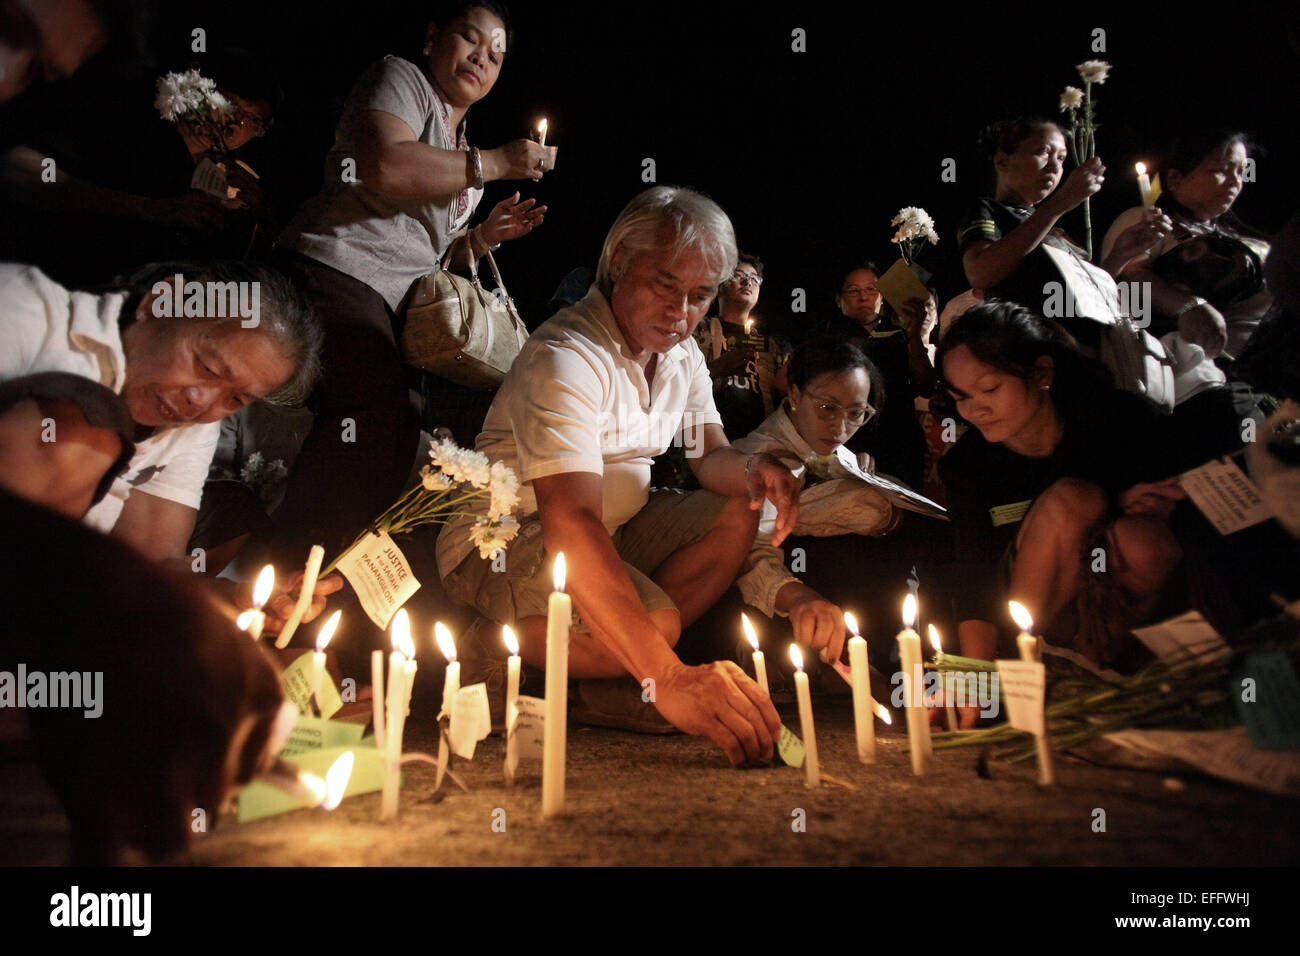 Quezon City, Philippines. 3rd Feb, 2015. People light candles and offer flowers and prayers for the slain 49 members of the Philippine National Police Special Action Force (PNP-SAF) at the gate of the PNP Headquarters in Quezon City, the Philippines, Feb. 3, 2015. There was lack of coordination and planning between the military forces and the leadership of the PNP-SAF during the violent clash in Mamasapano, Maguindanao on Jan. 25, chief of the Armed Forces of the Philippines said on Tuesday. © Rouelle Umali/Xinhua/Alamy Live News Stock Photo